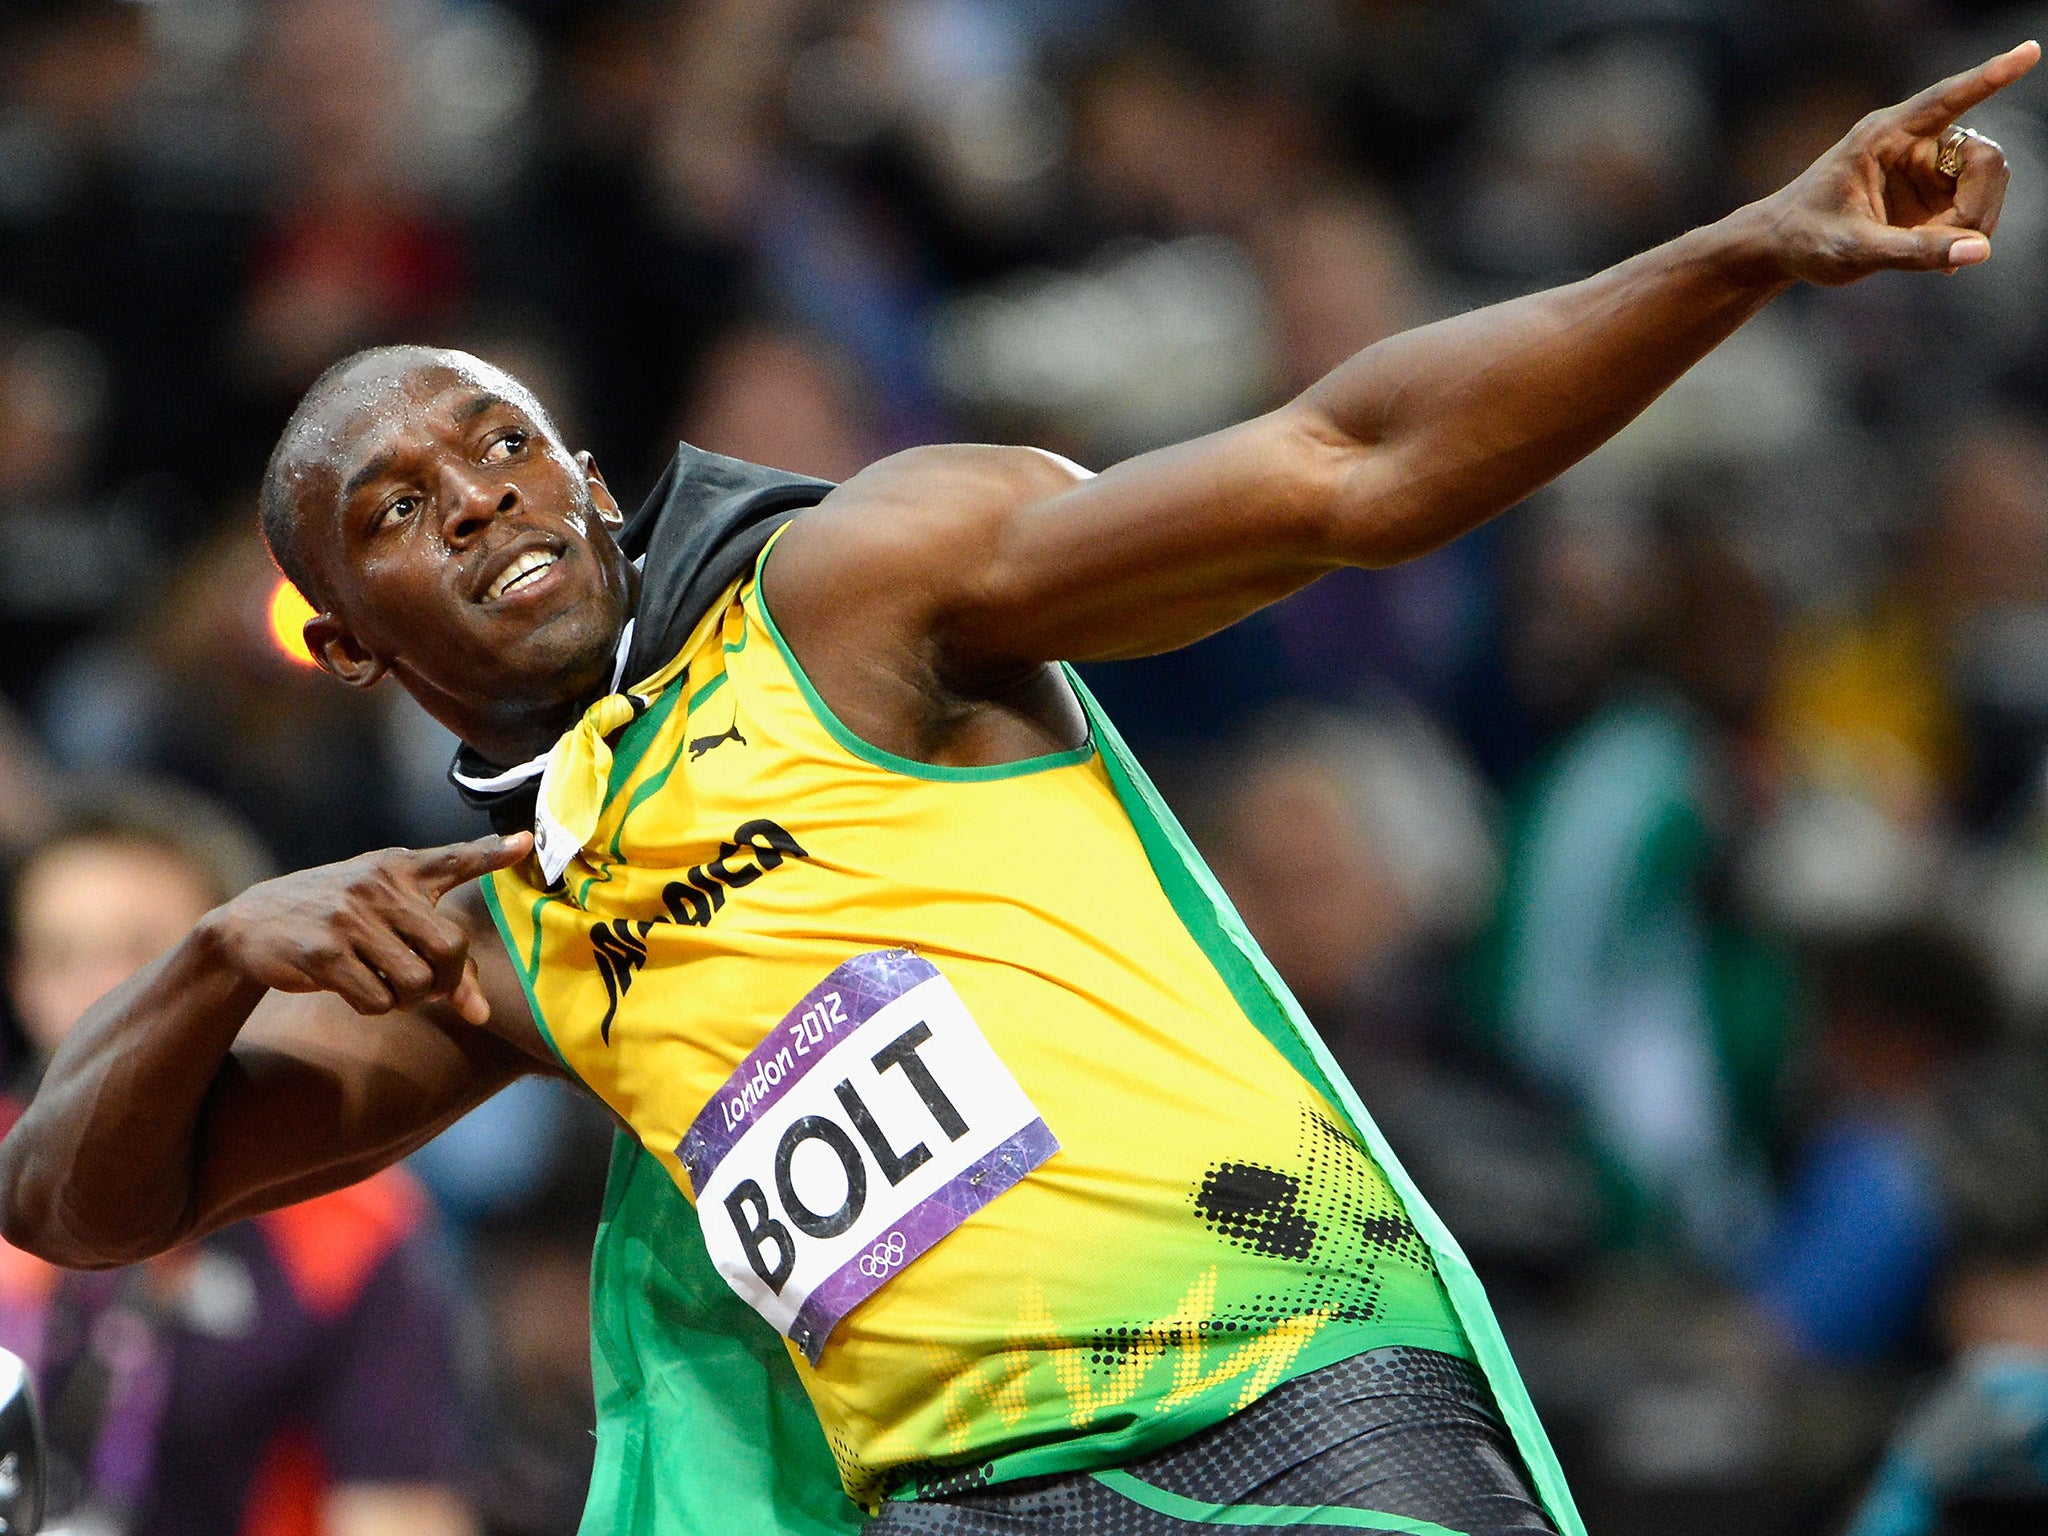 Usain Bolt broke the 100m and 200m world record at the 2008 Beijing Olympics